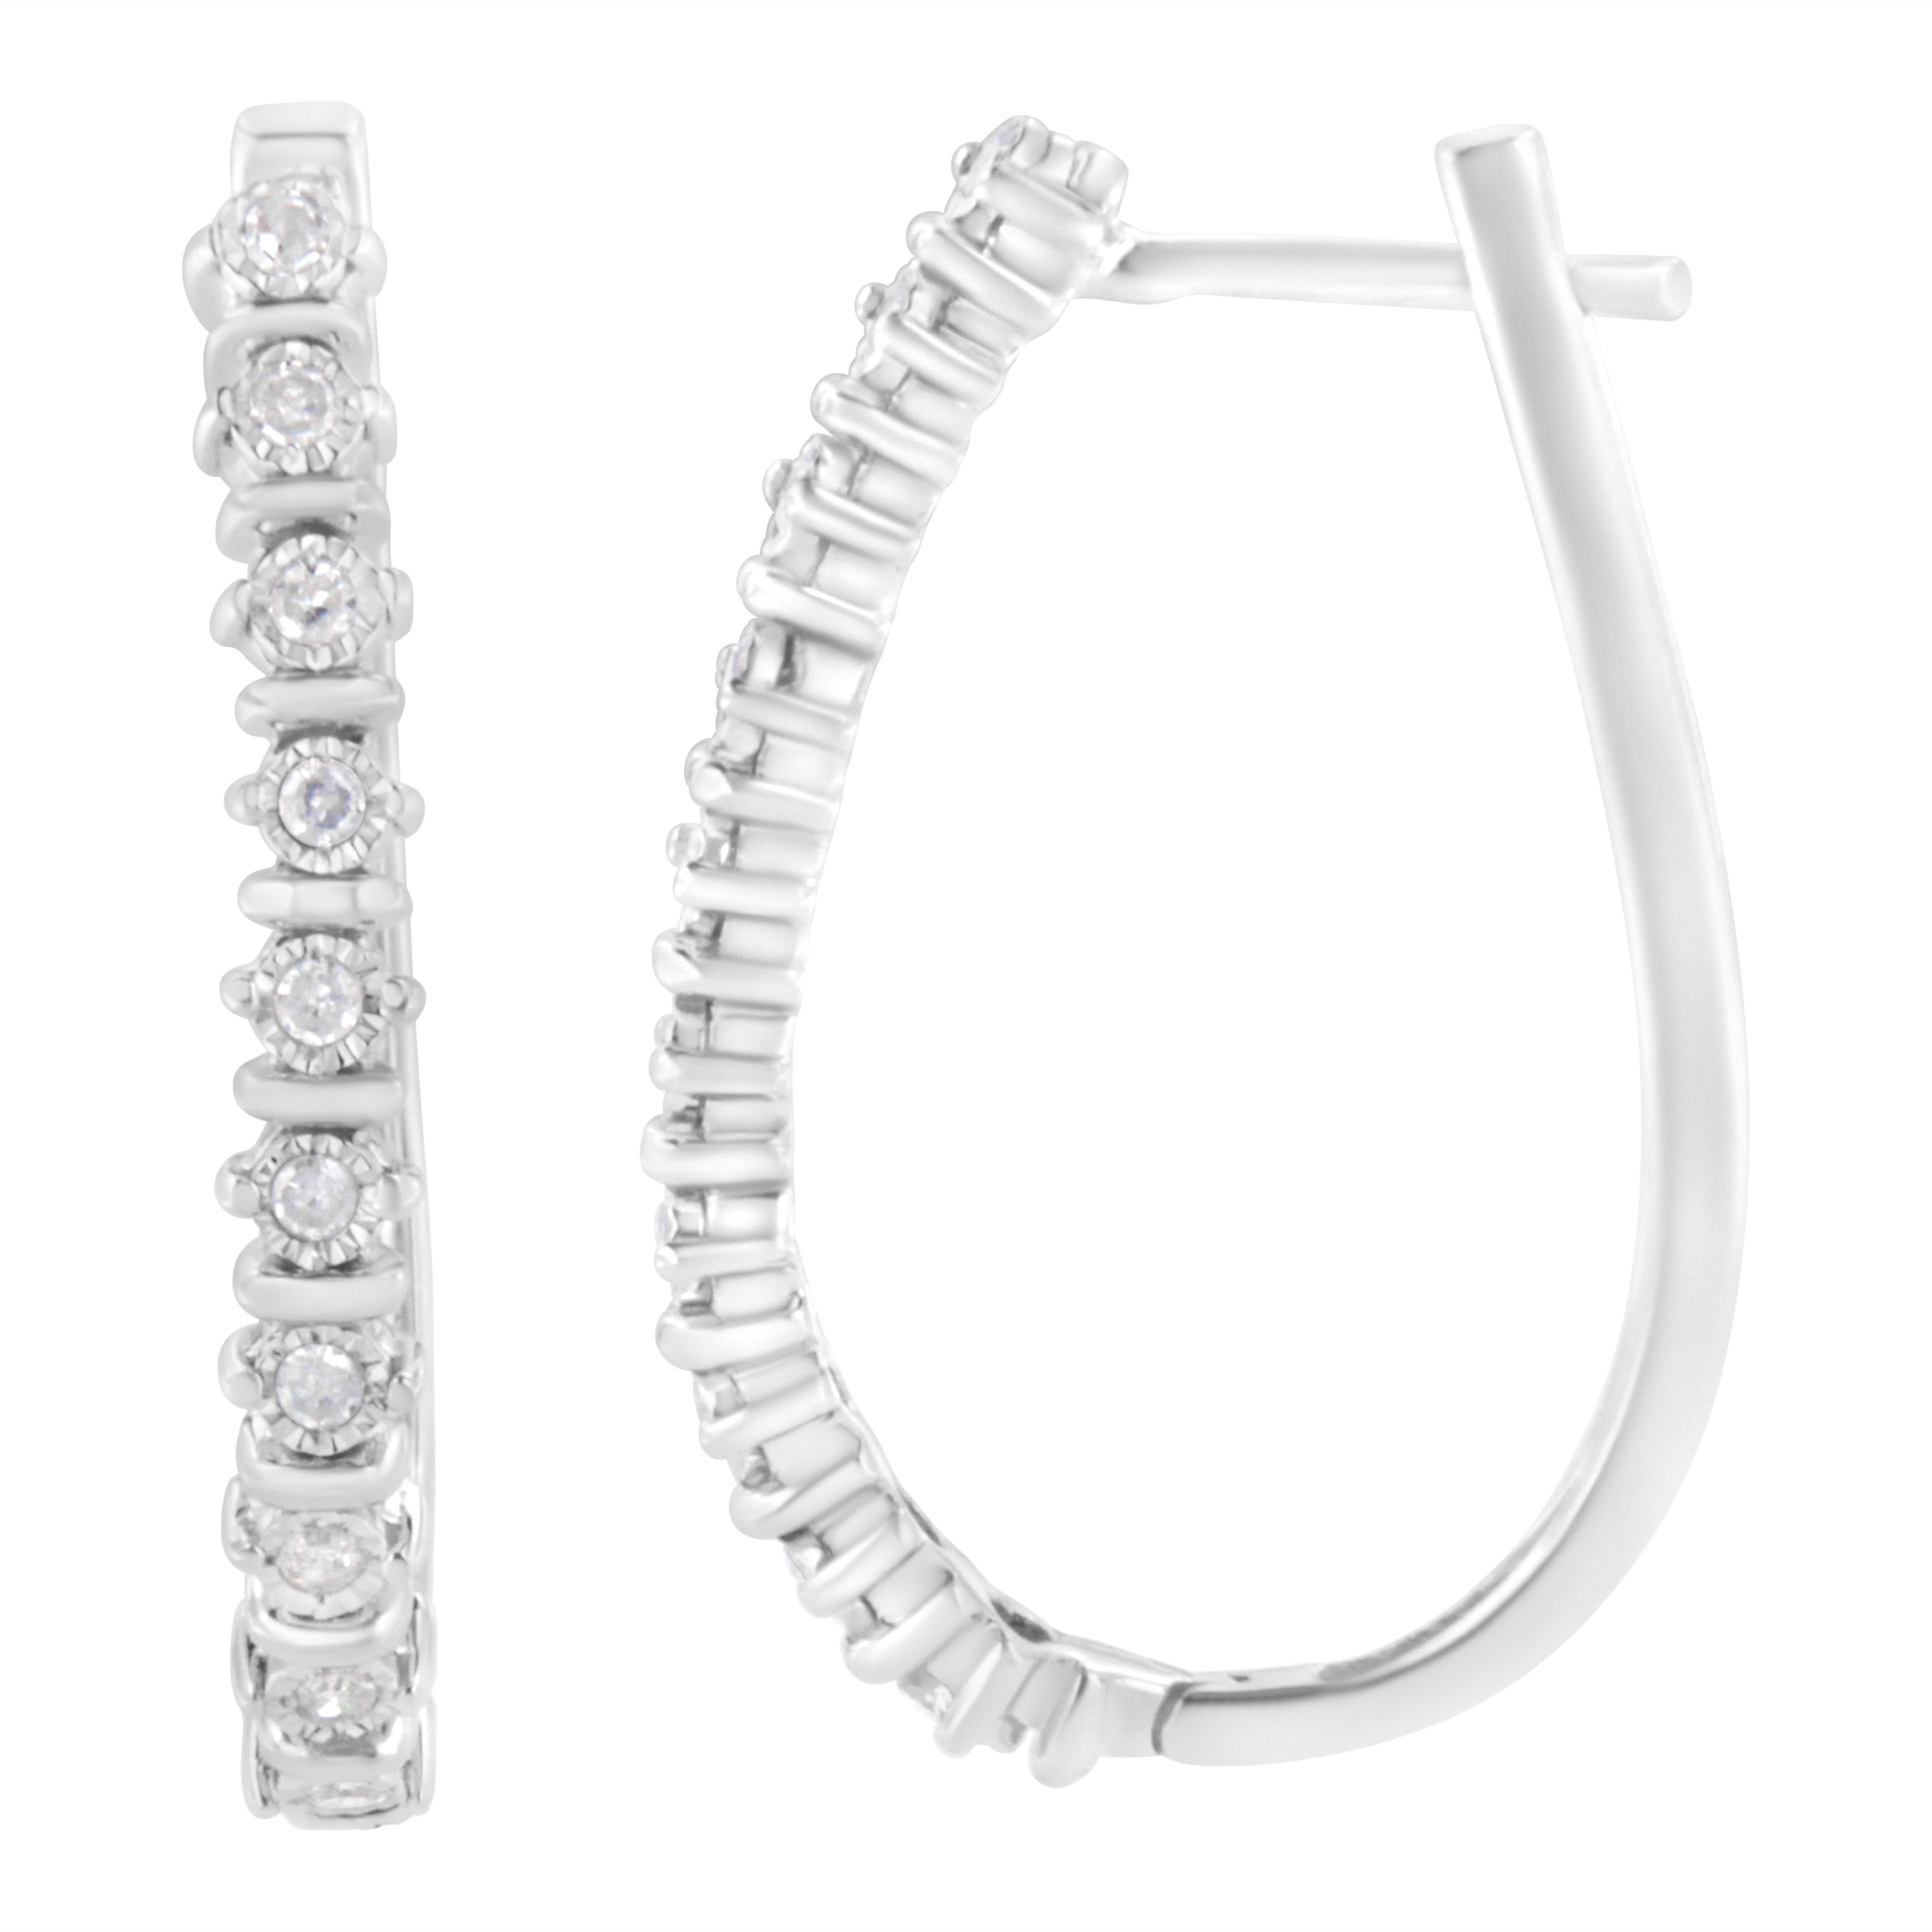 Crafted in cool sterling silver, these stunning hoop earrings feature 1/4ct TDW of diamonds. Each hoop features glittering miracle set diamonds separated by polished silver ribbons outlining the front outside edge. A classic design that won't go out